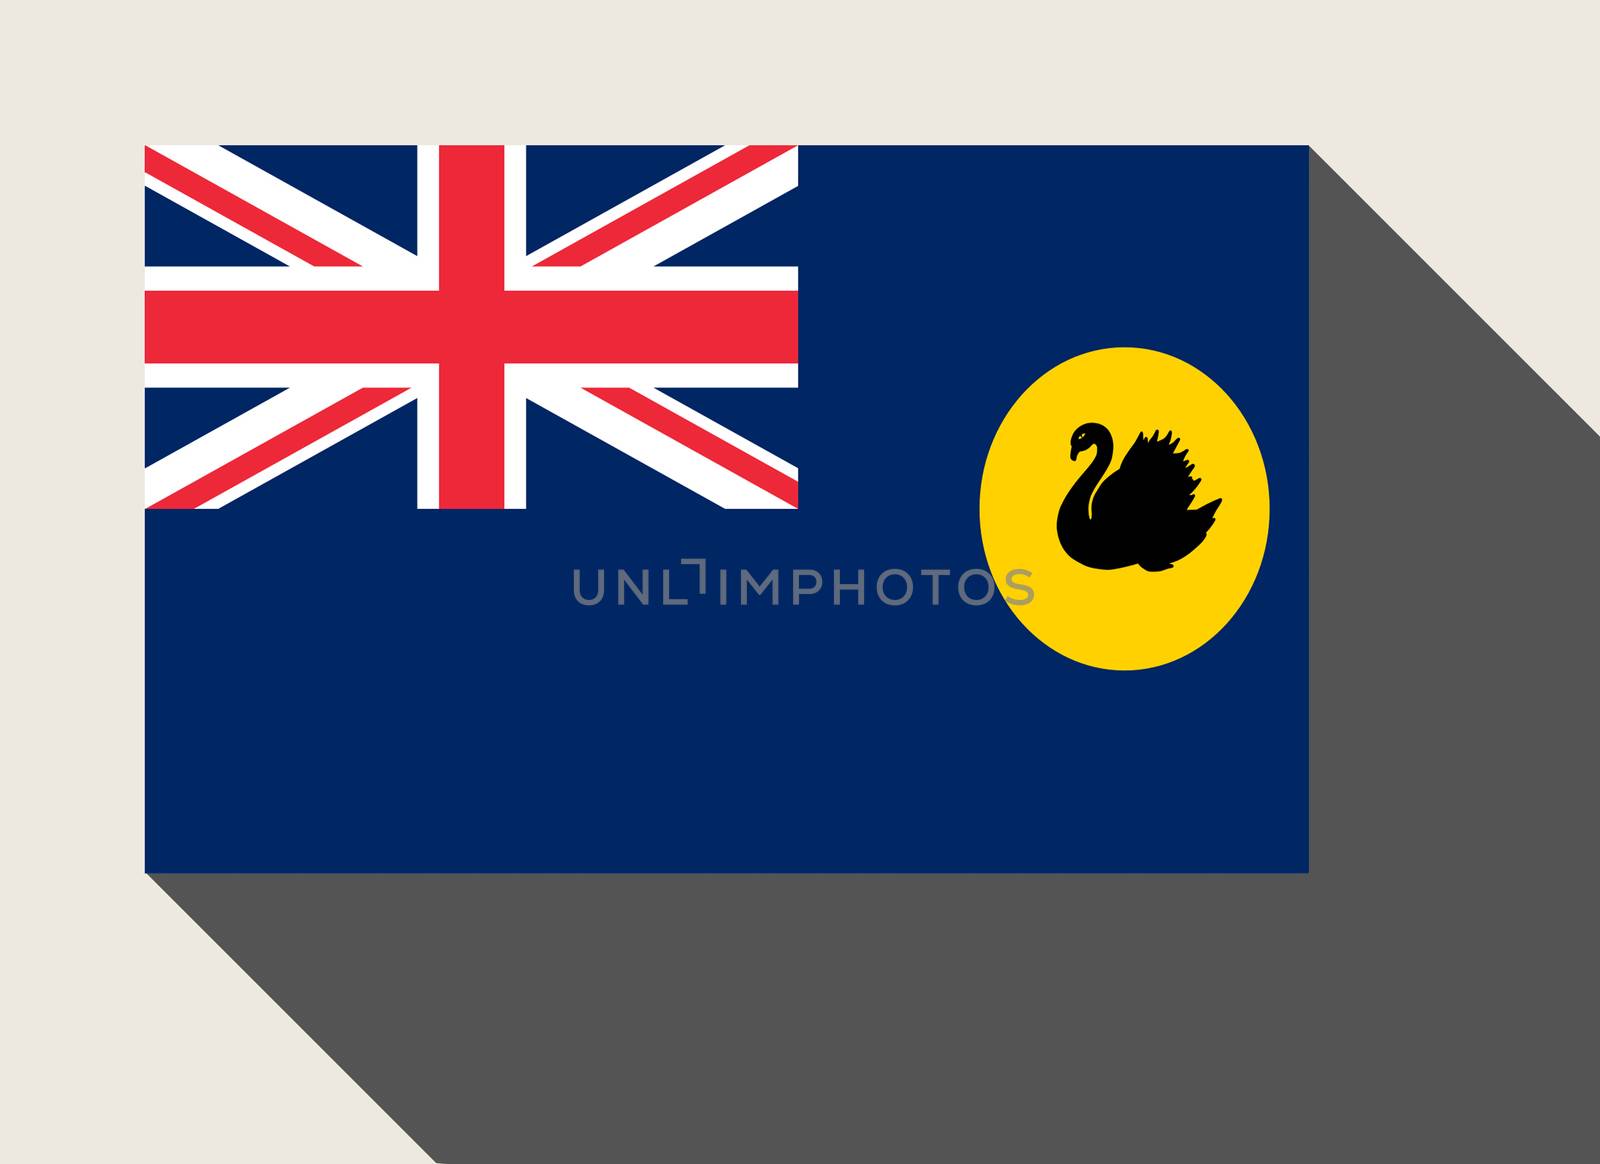 State of Western Australia flag in flat web design style.